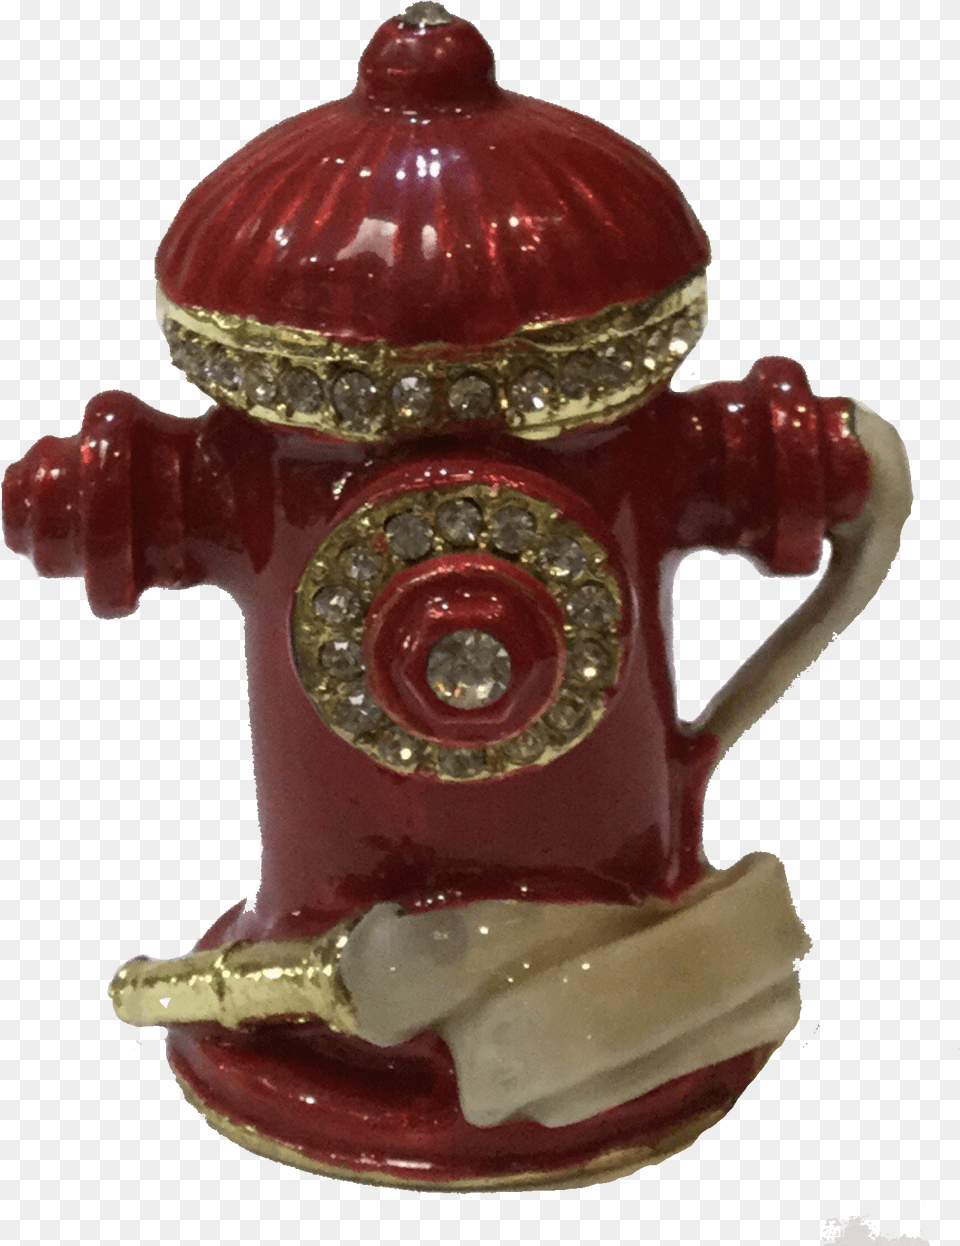 Fire Hydrant Teapot, Cup, Pottery Free Transparent Png